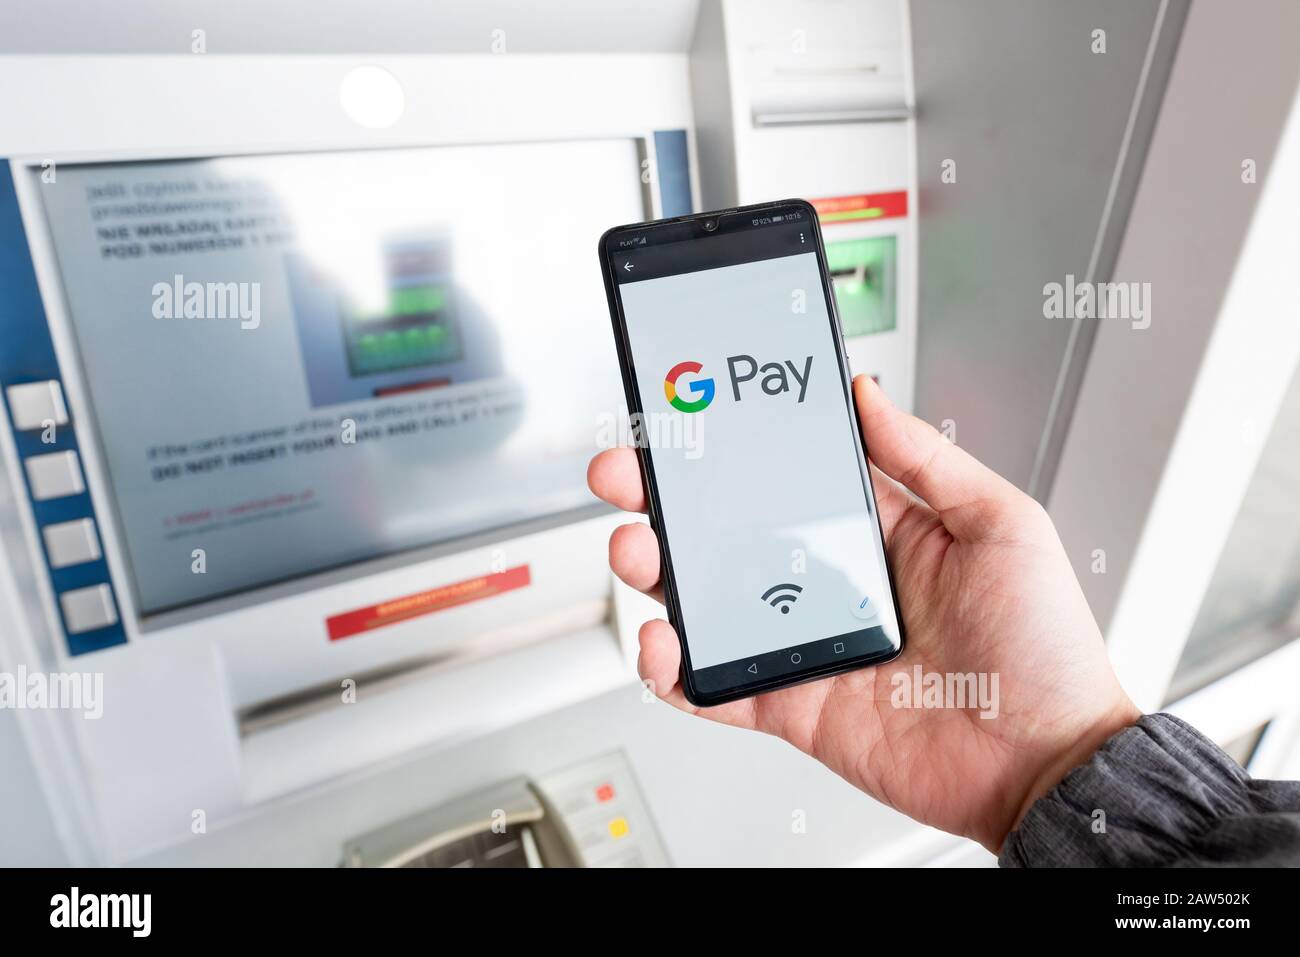 Wroclaw, Poland - NOV 06, 2019: Man holding smartphone with Google Pay logo. Google Pay is electronic wallet developed by Google. Stock Photo